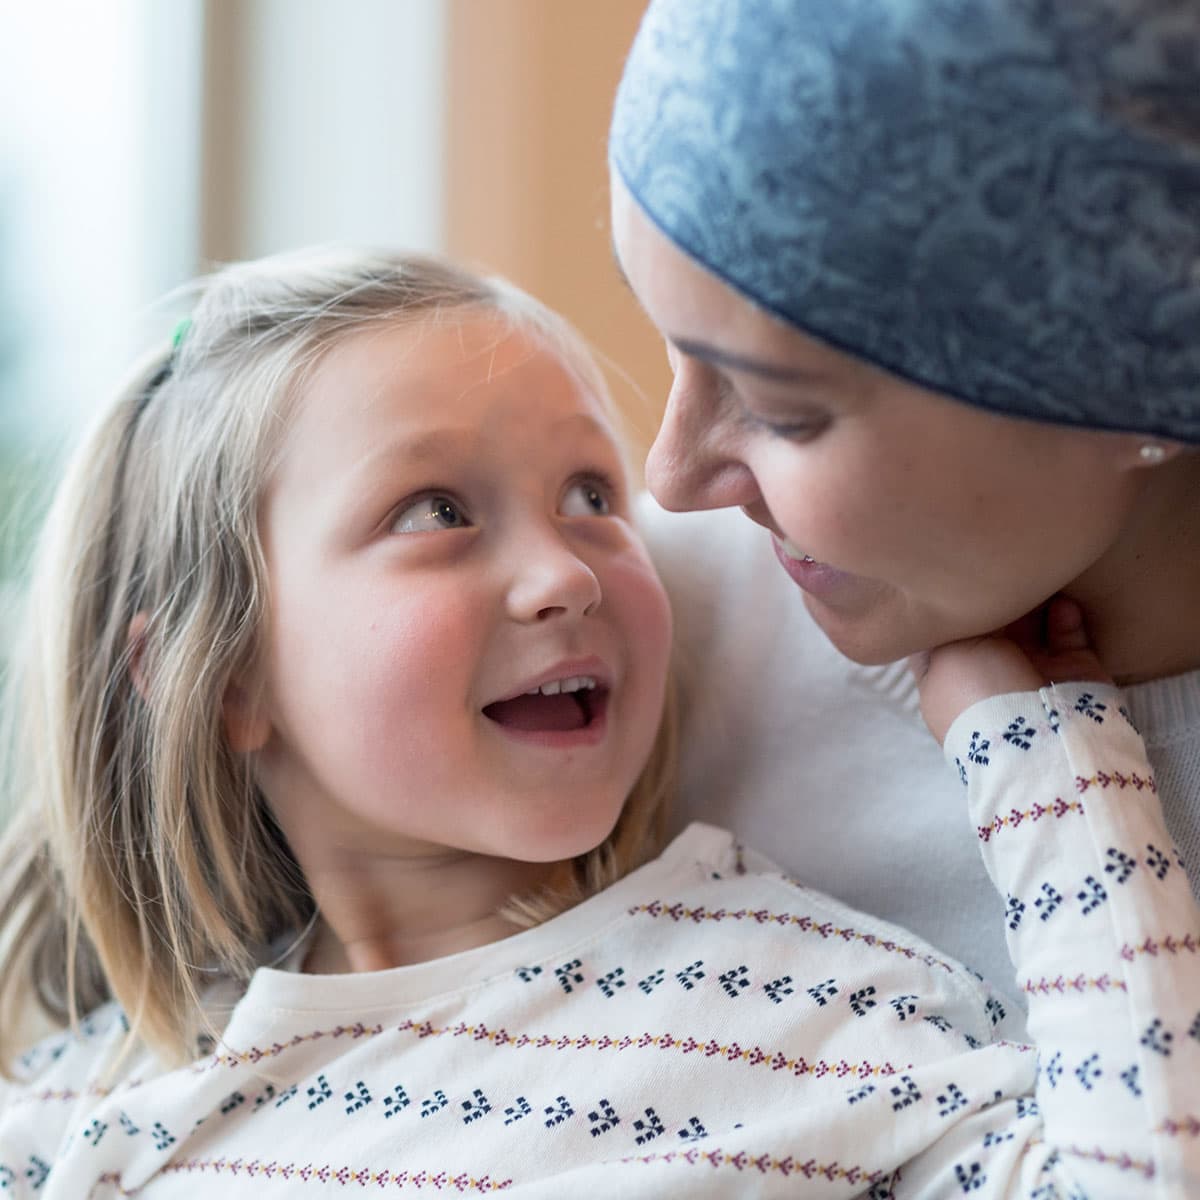 Woman with cancer is hugging her daughter.